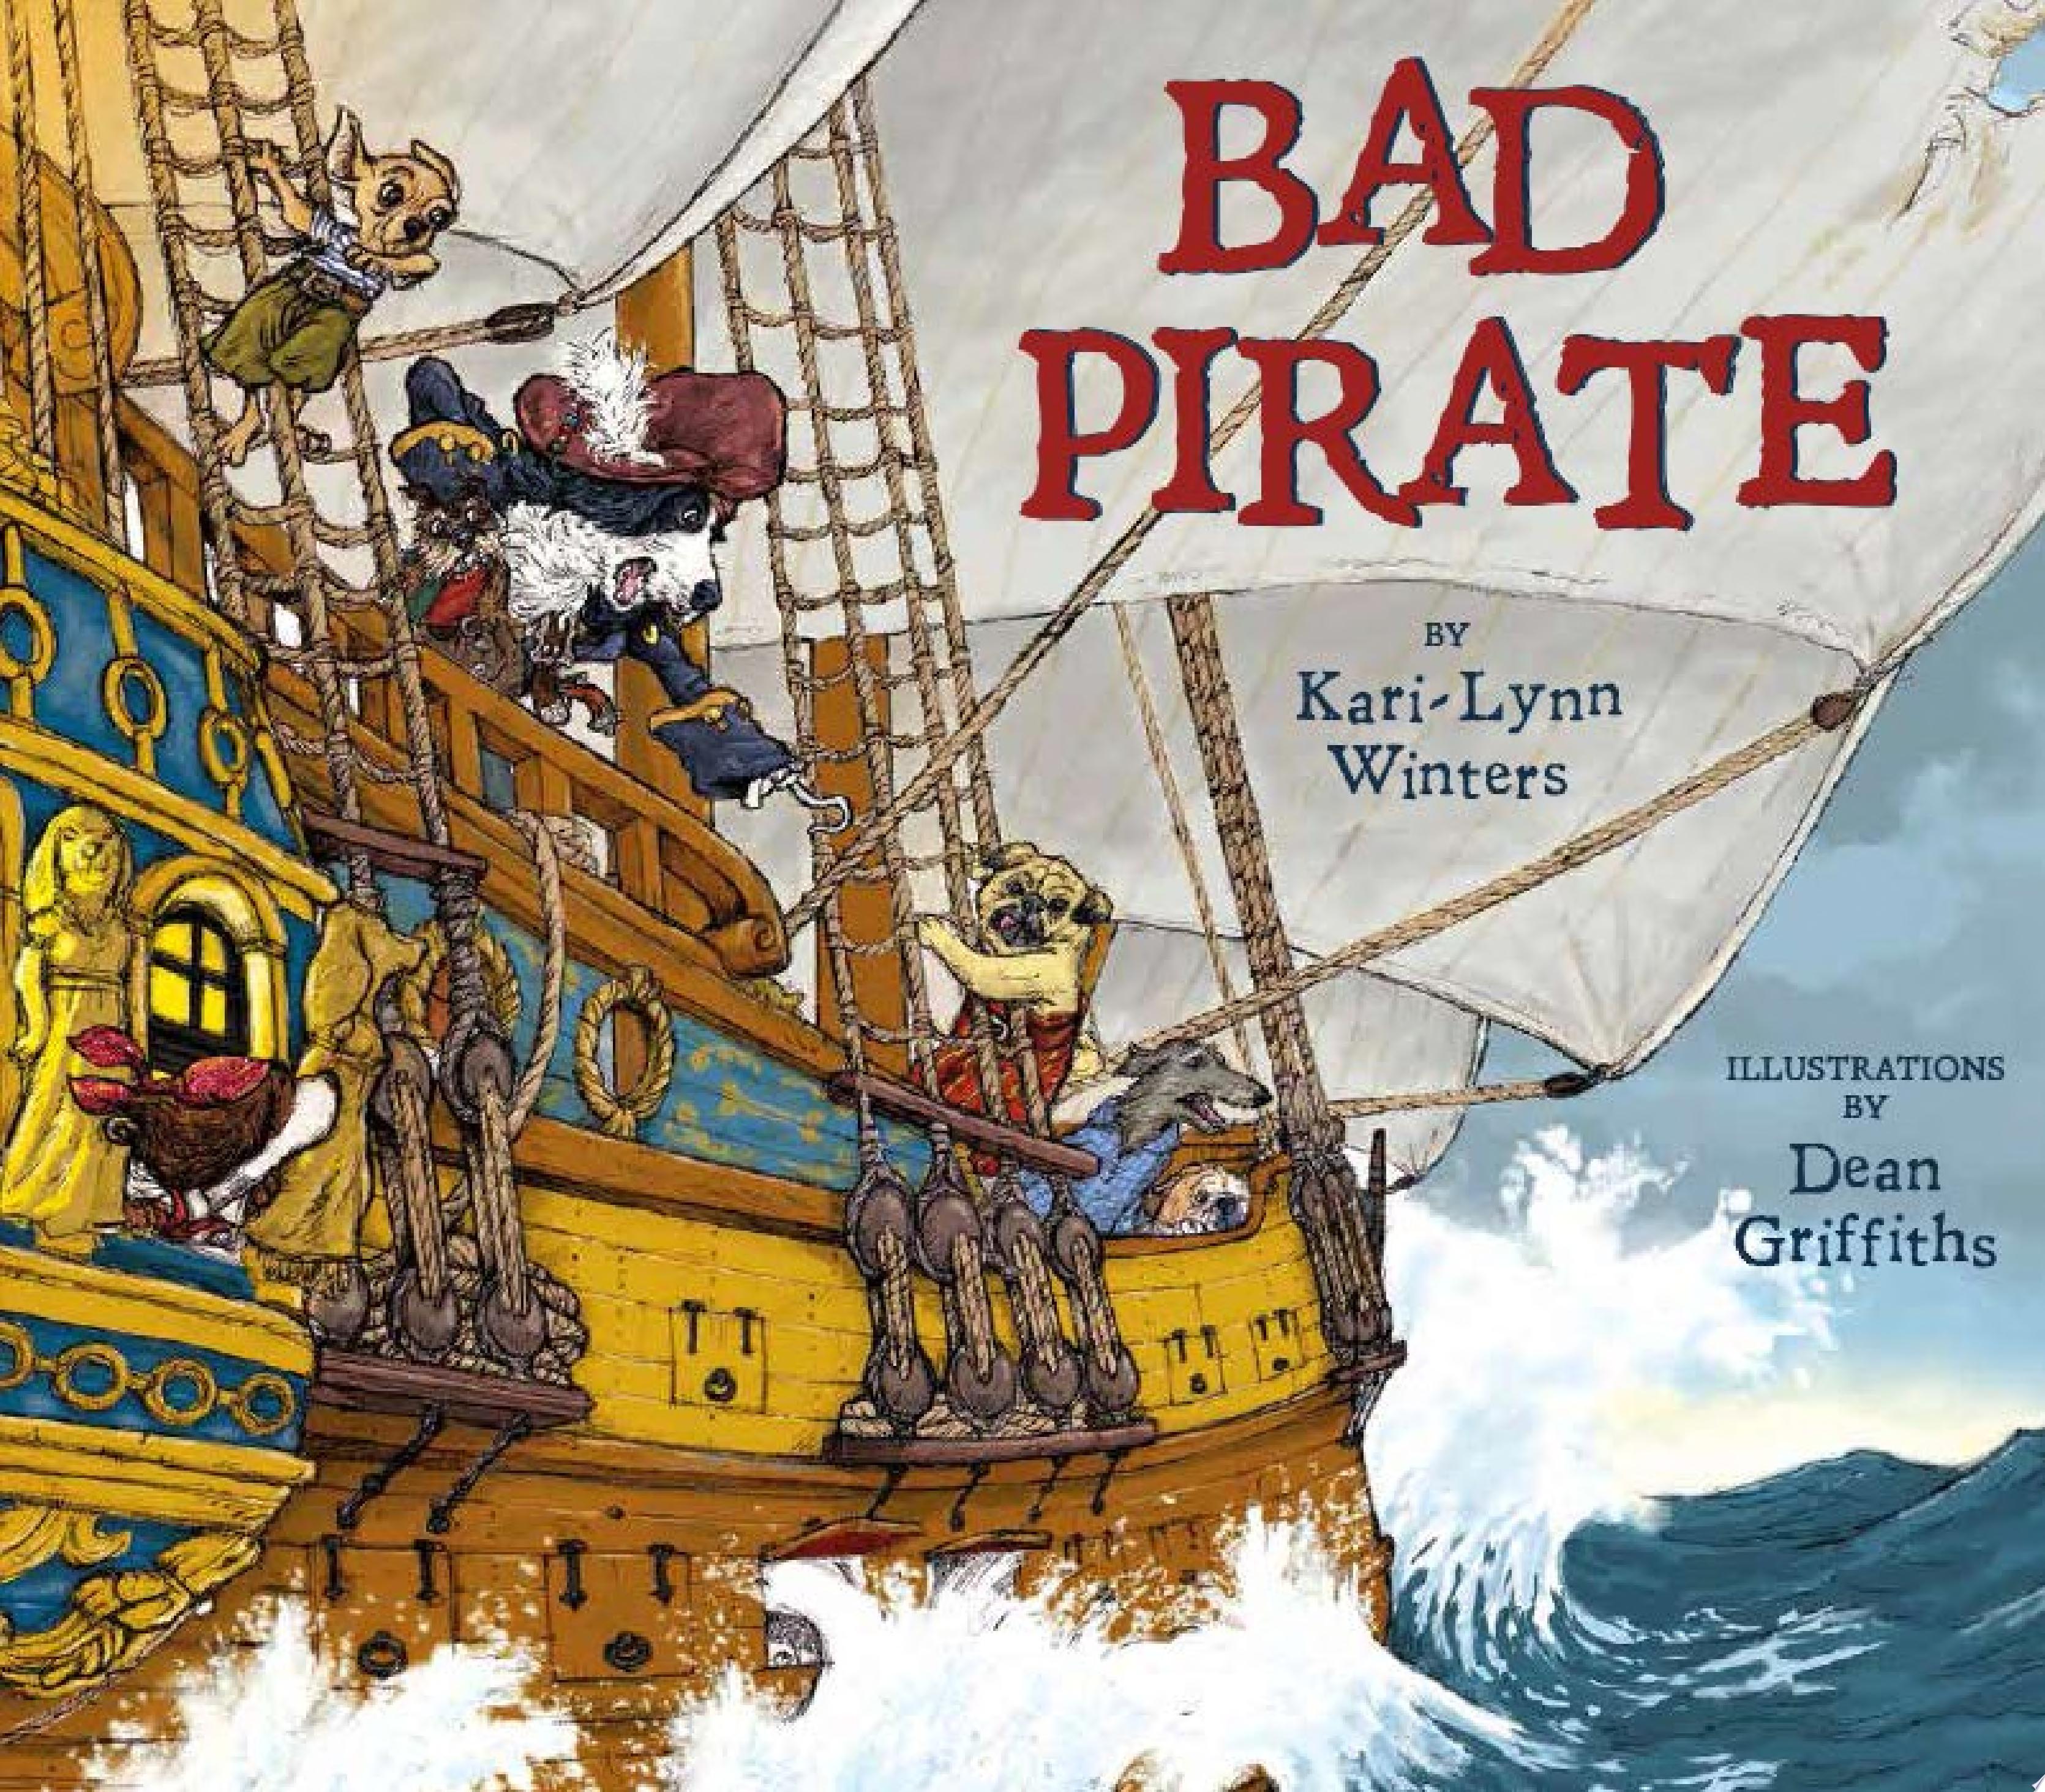 Image for "Bad Pirate"